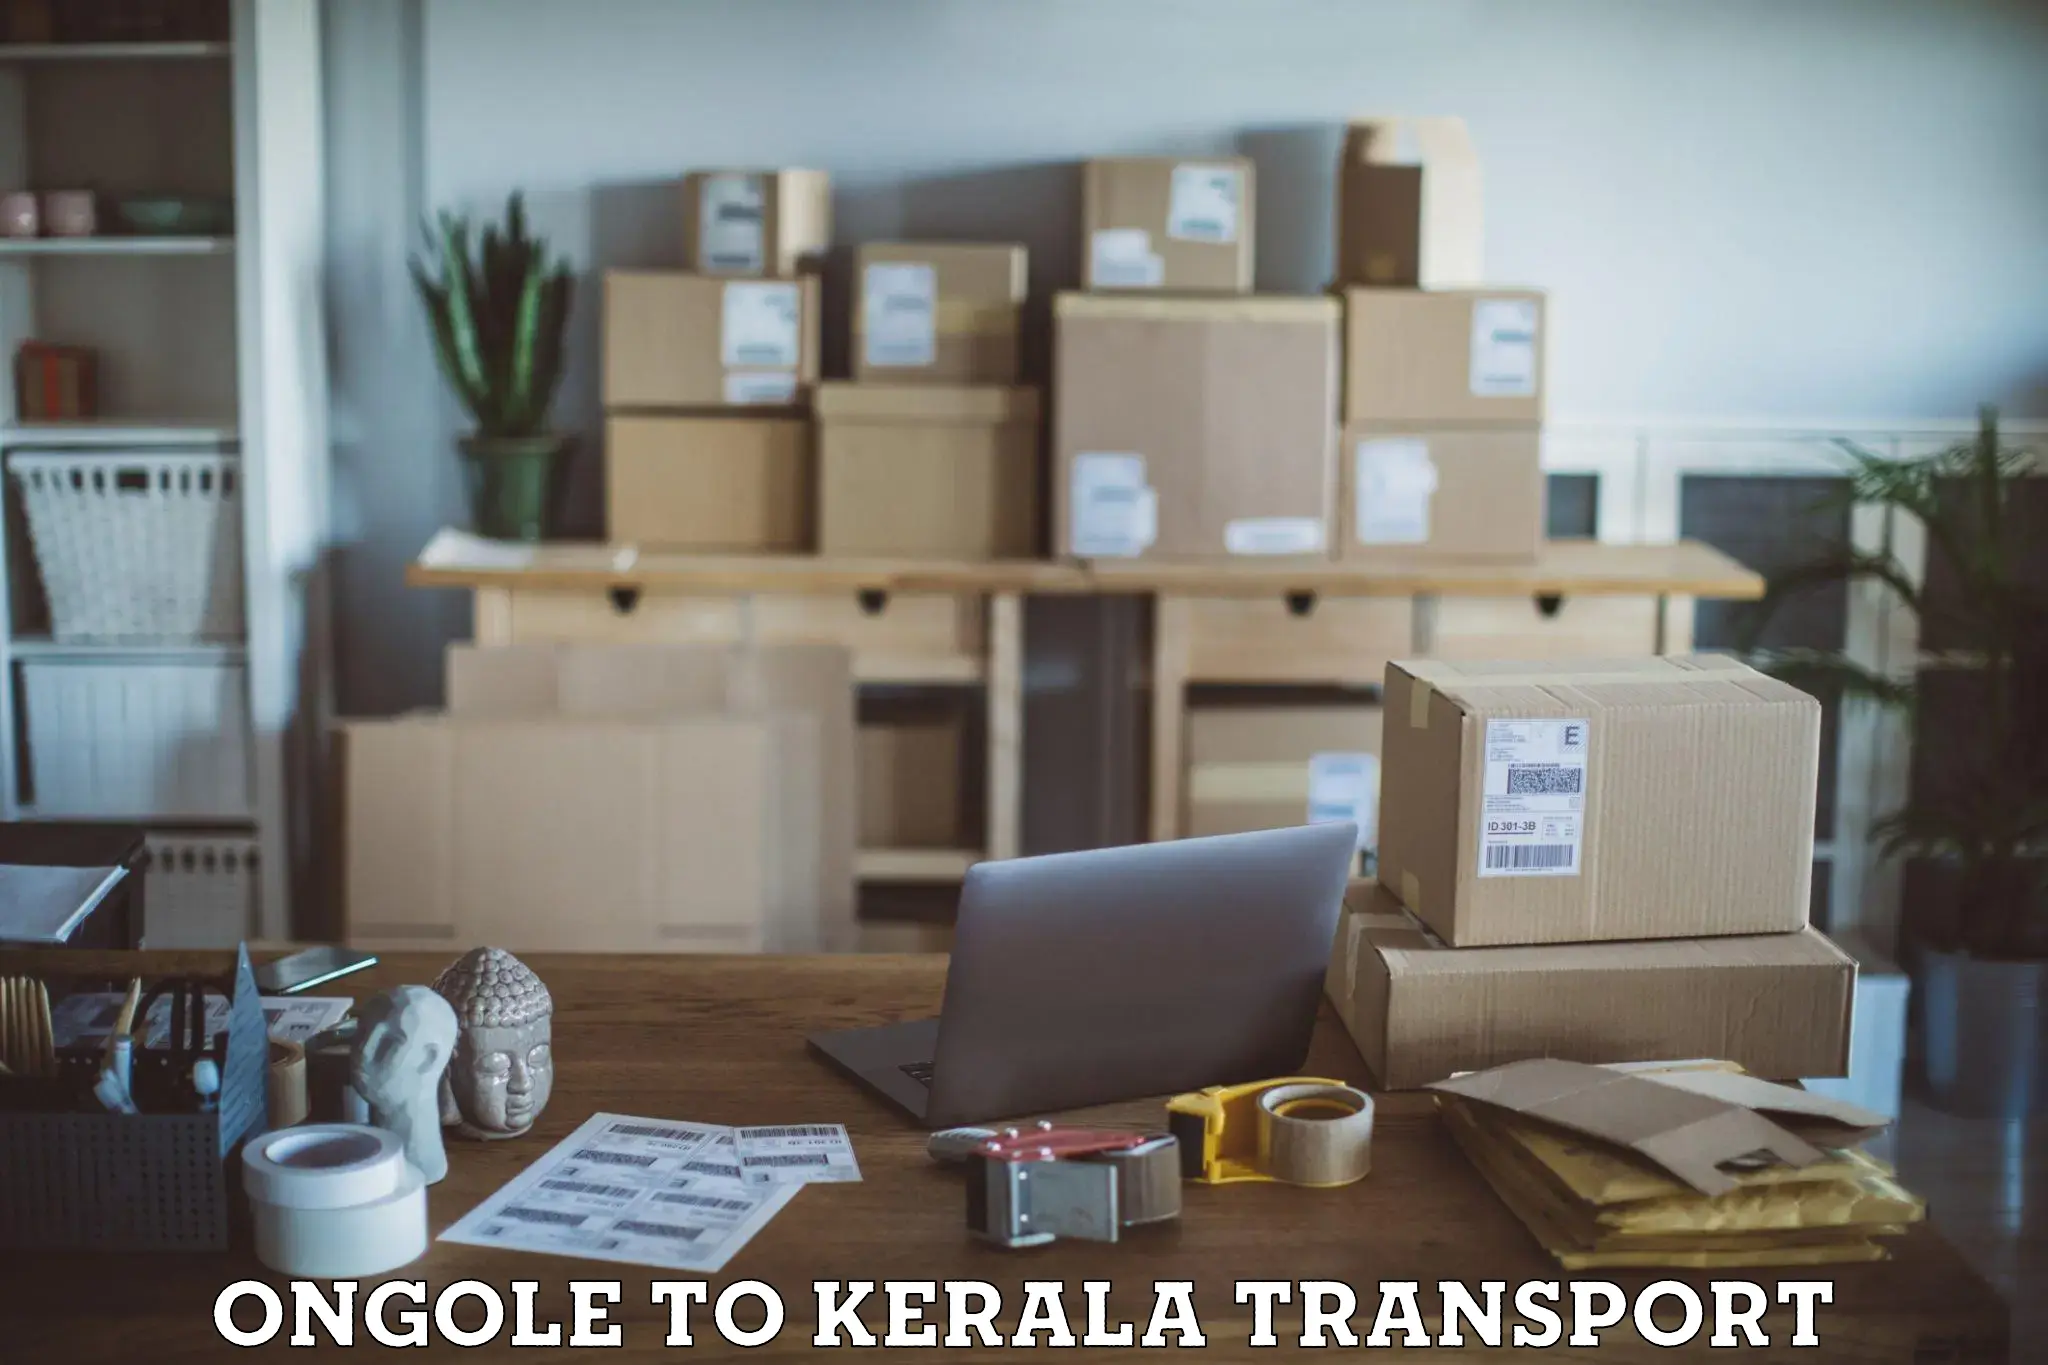 Parcel transport services Ongole to Cochin Port Kochi